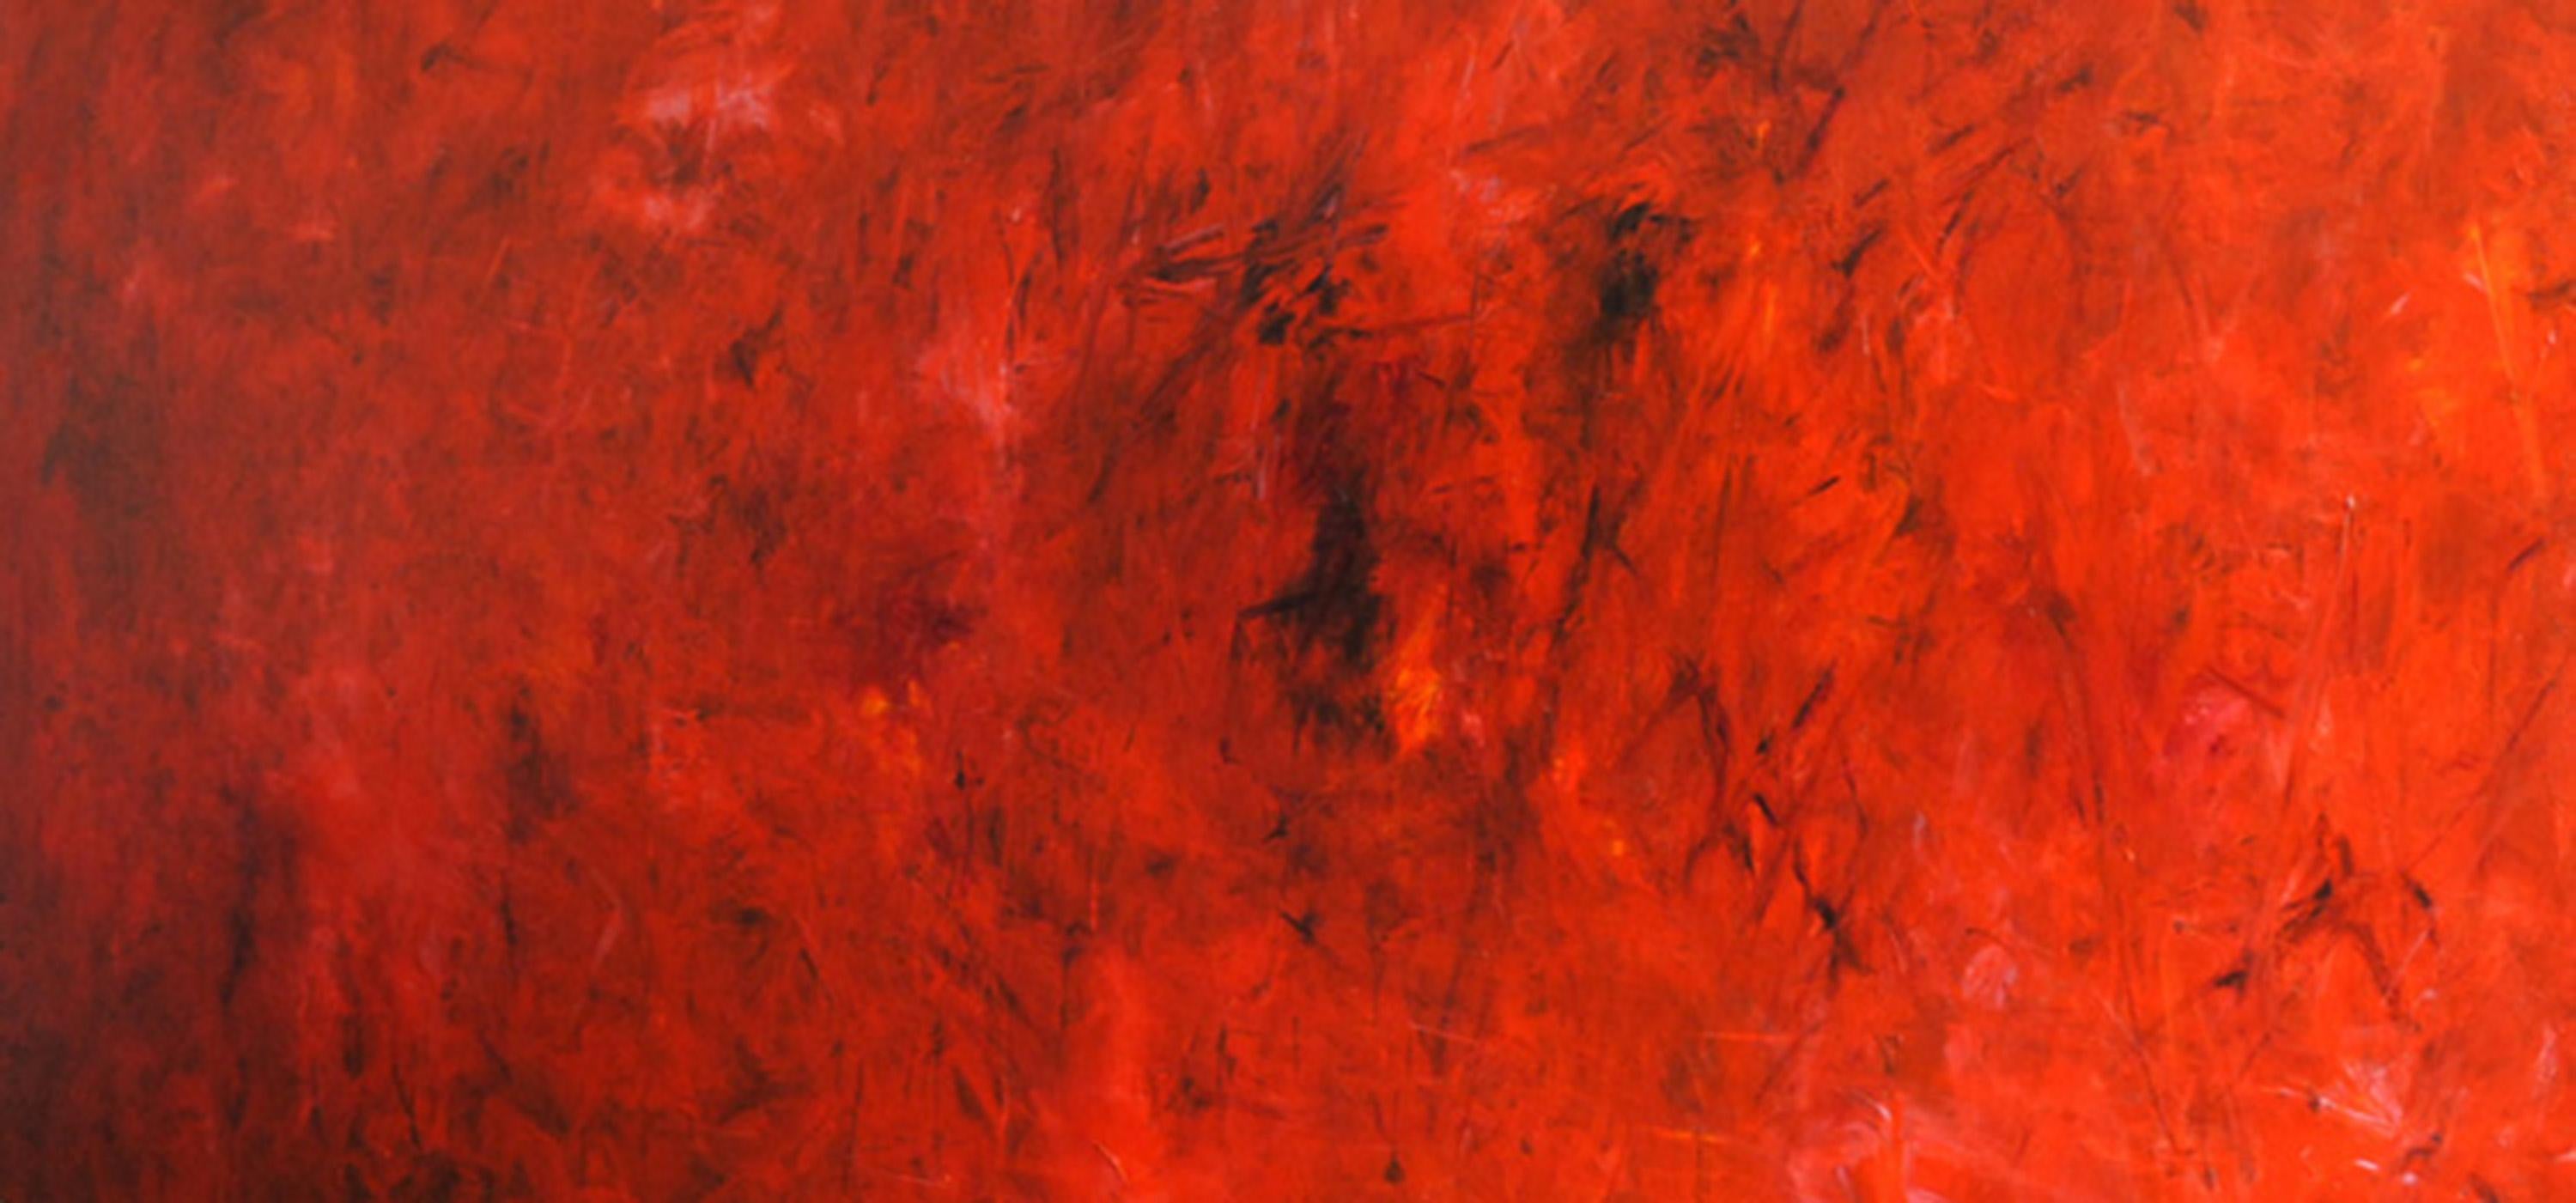 Md Tokon - The Red Land, Painting 2021